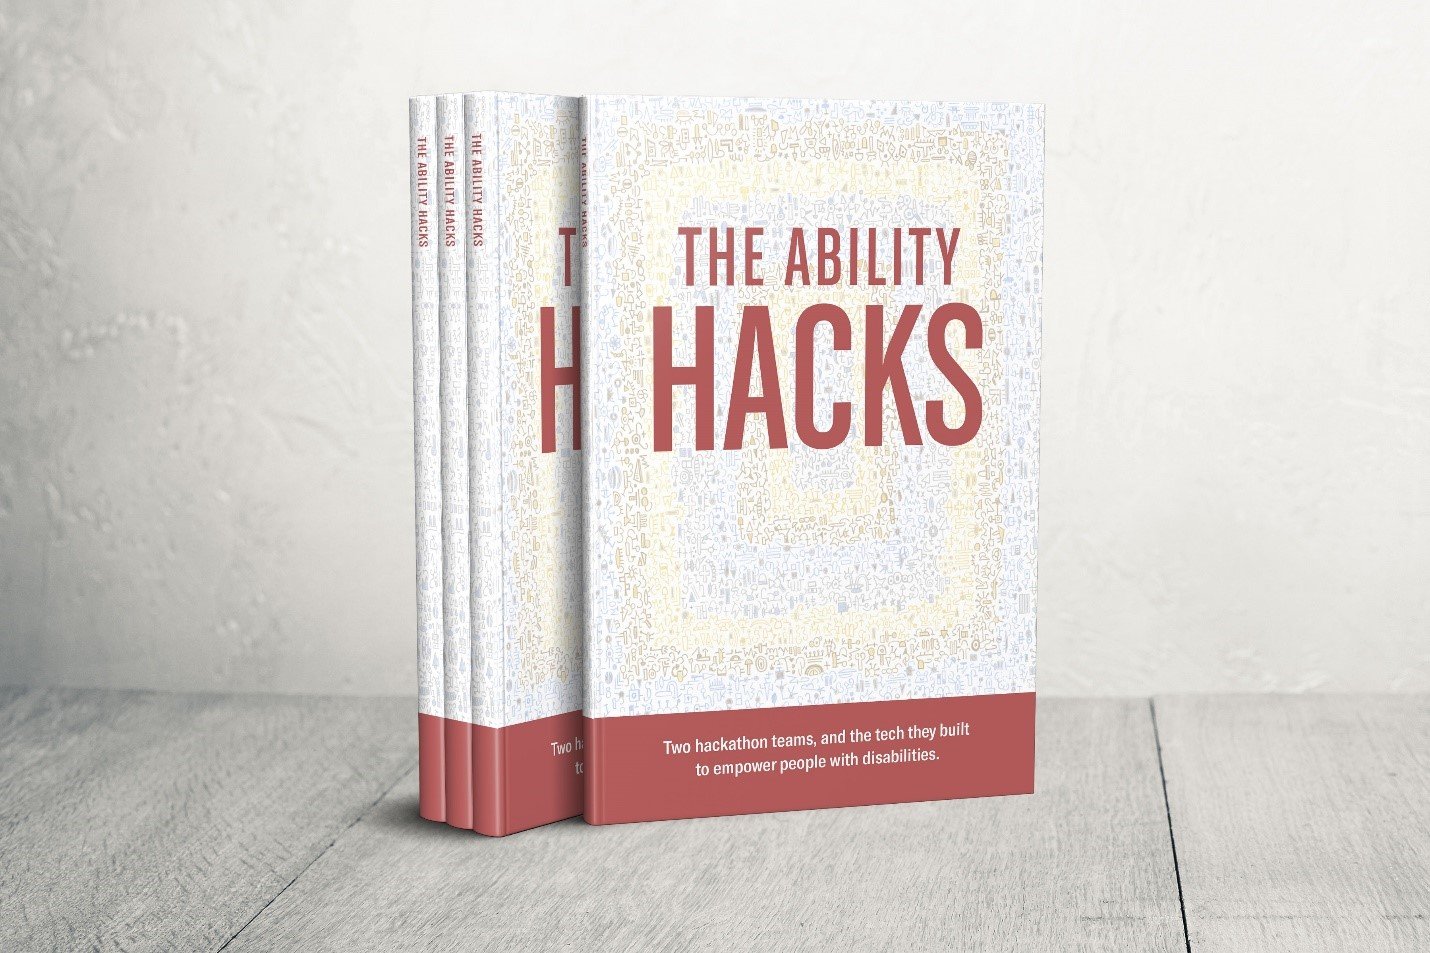 Microsoft book chronicles stories behind 'Ability Hacks' for people with disabilities